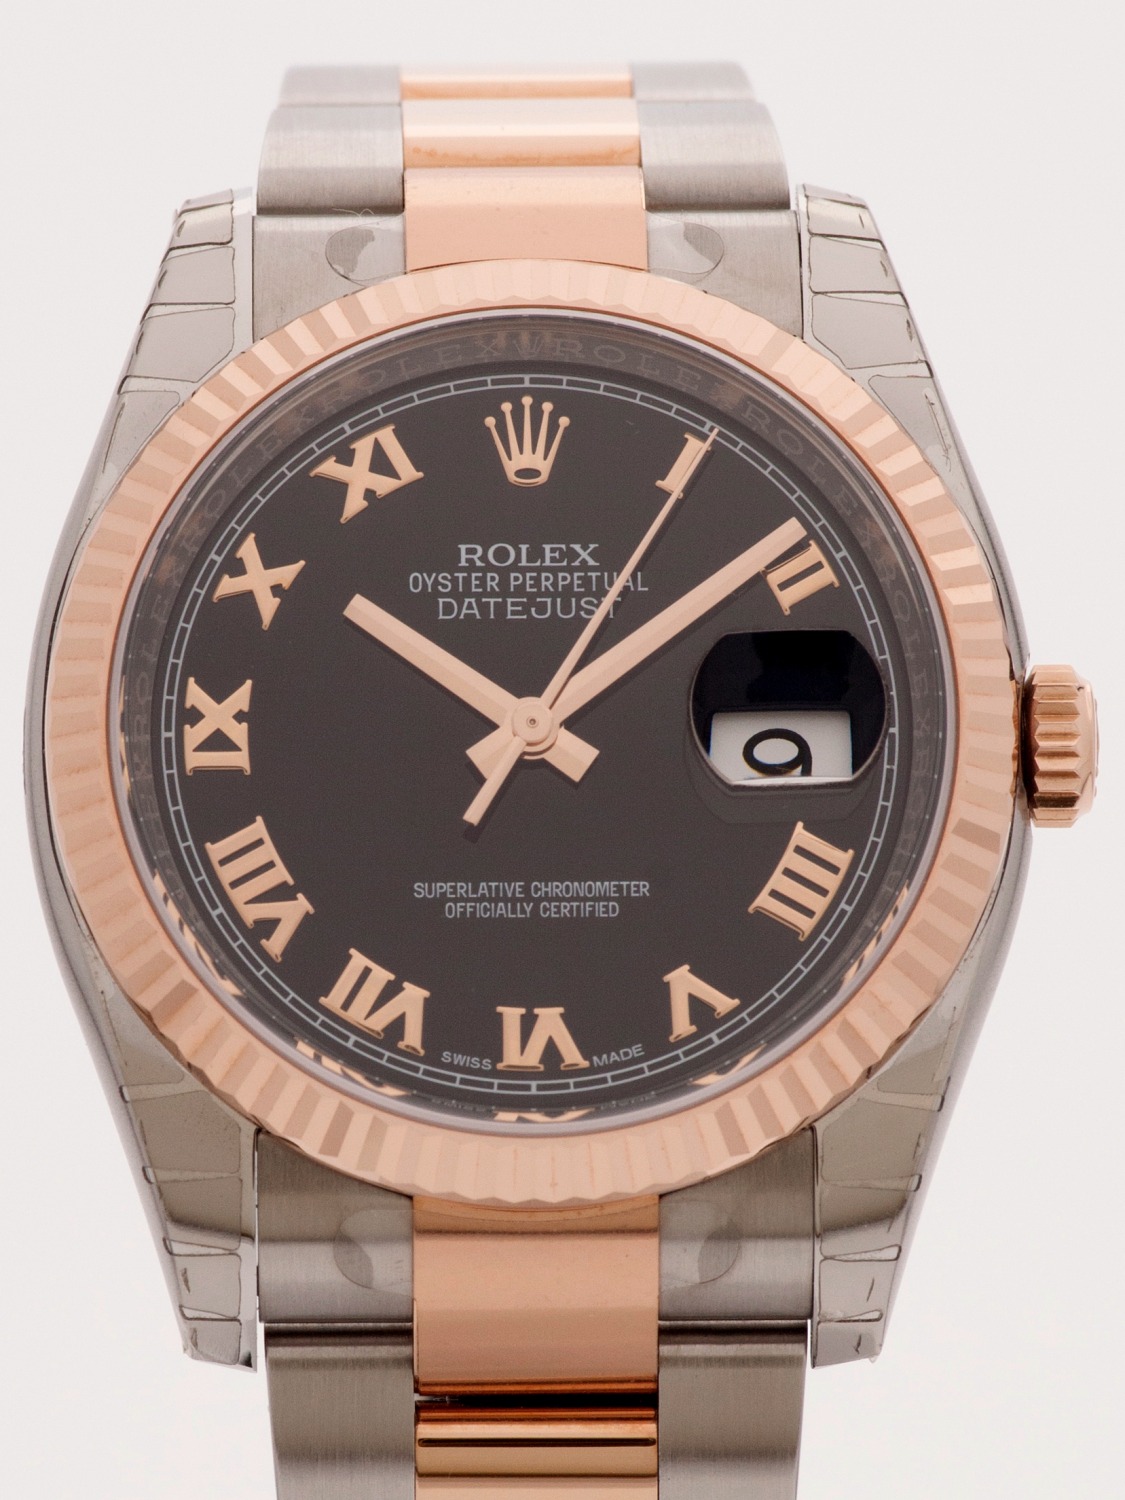 Rolex Datejust Two-Tone 36MM Black Dial Roman Numerals watch, two - tone (bi - colored) silver and rose gold